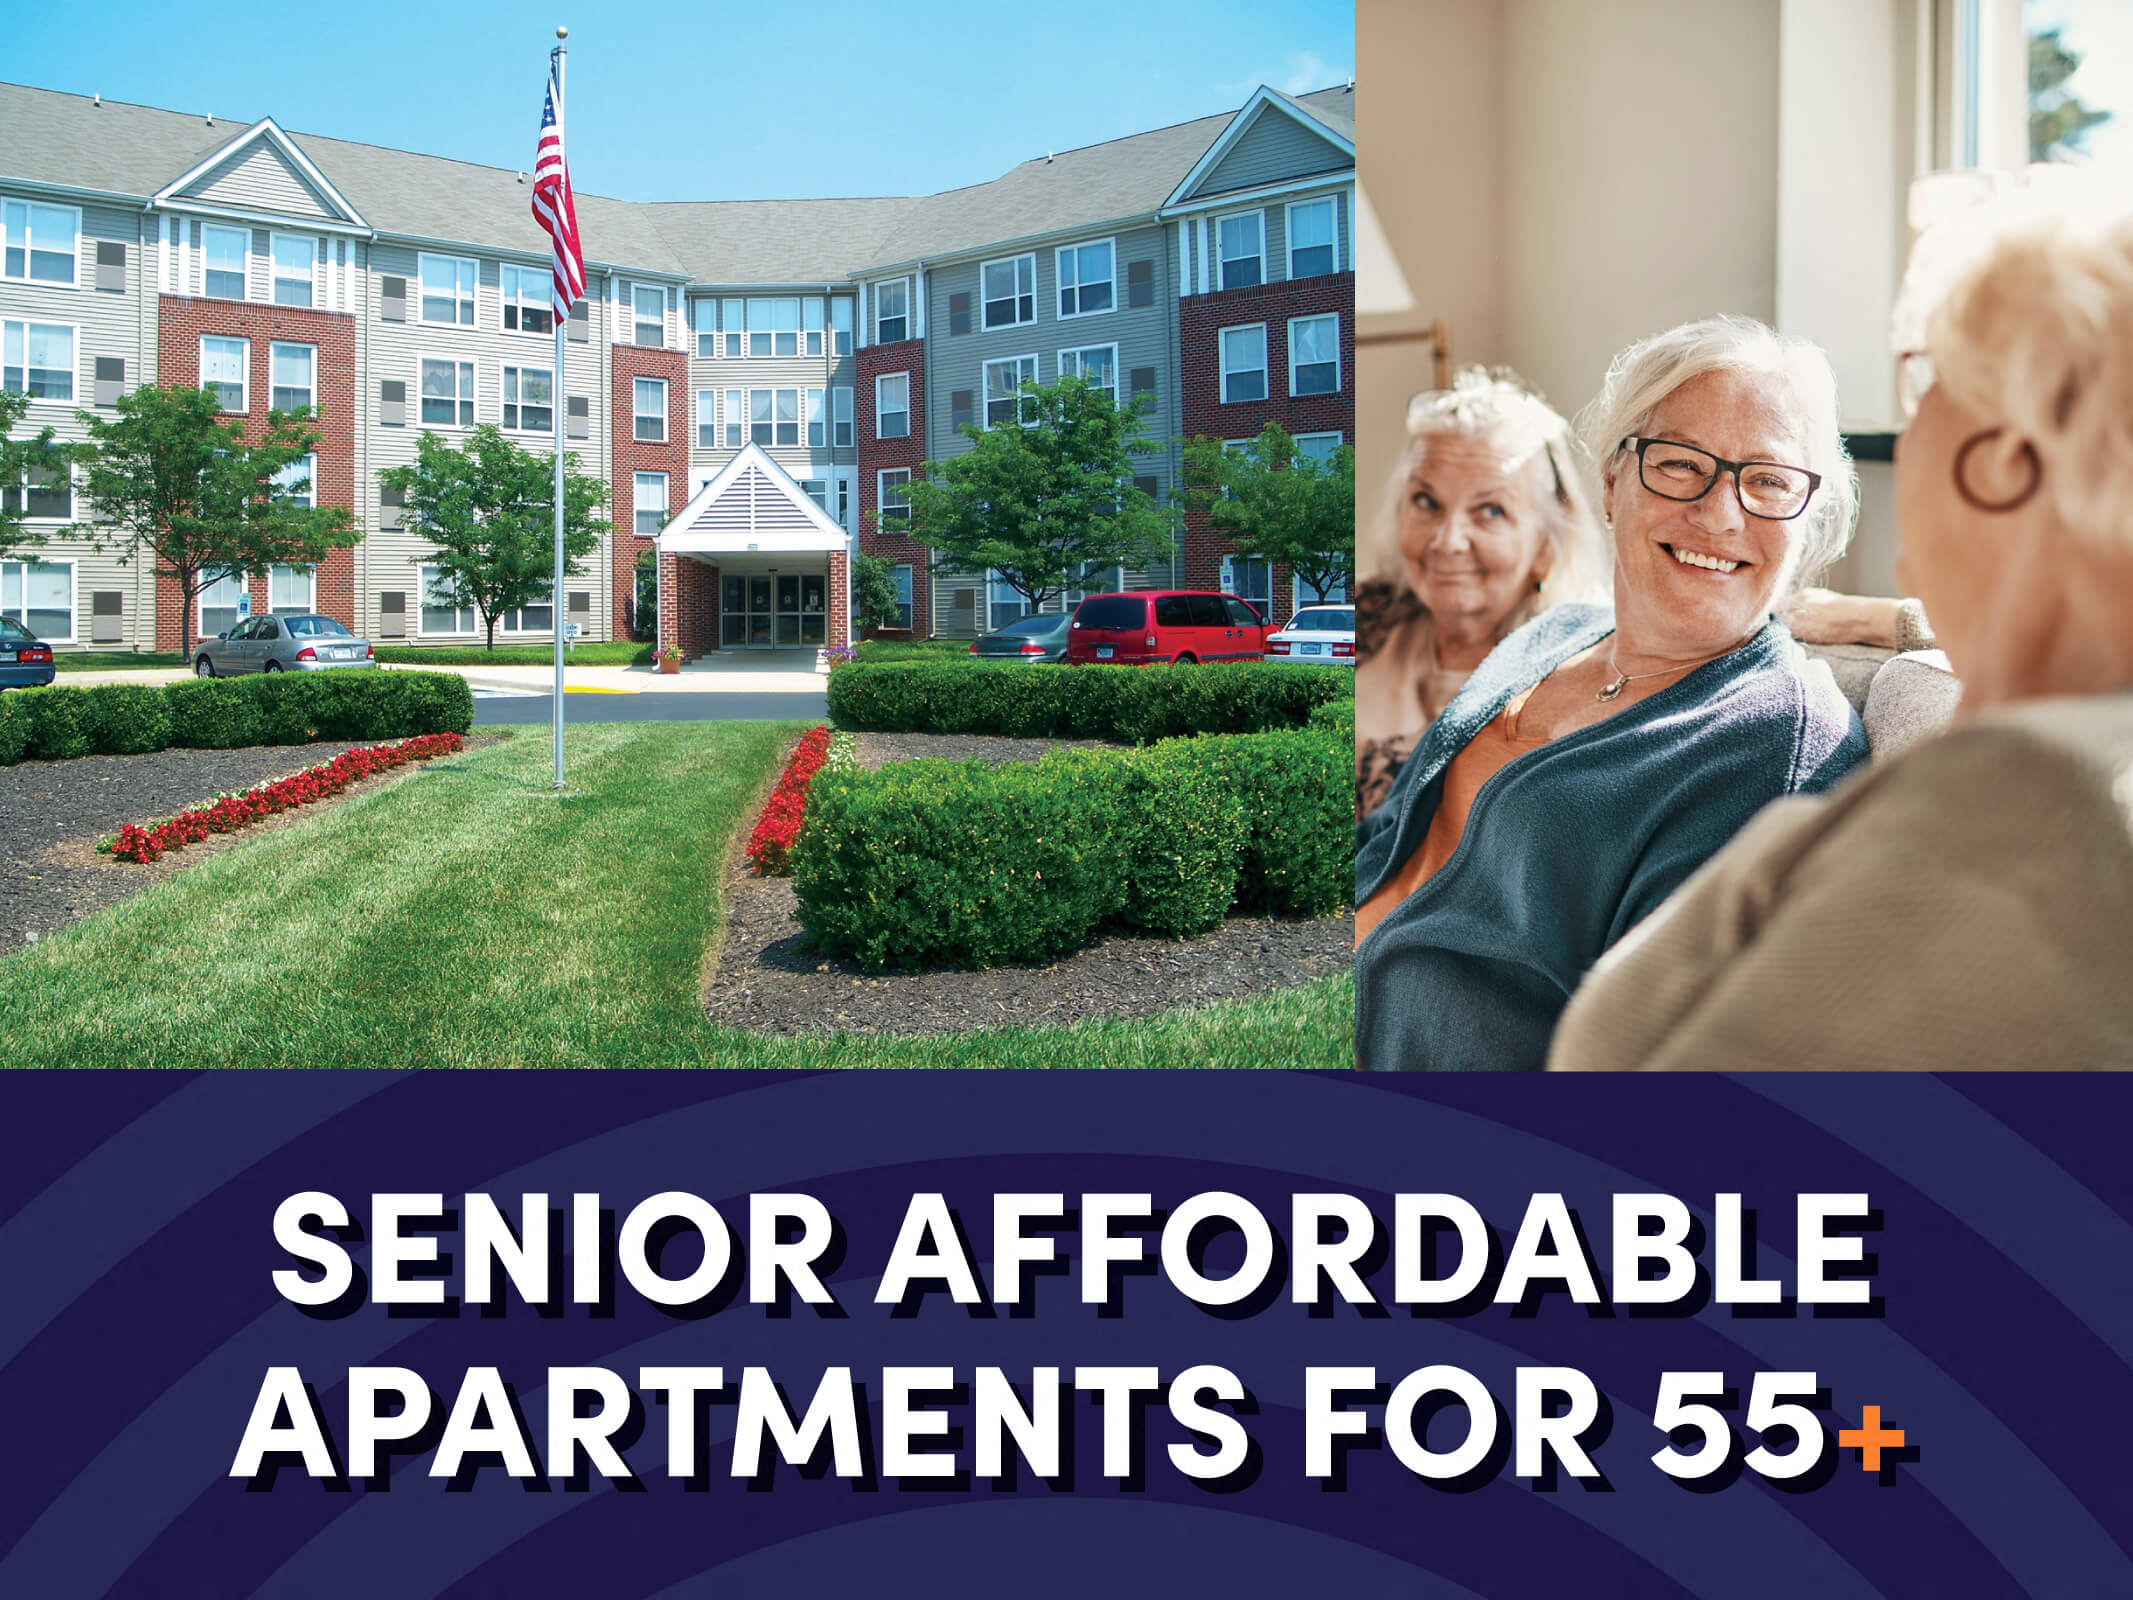 The building exterior next to 3 senior people sitting side by side above text that reads “Senior Affordable Apartments for 55+” for the Guardian Place Apartments in Richmond, Virginia.